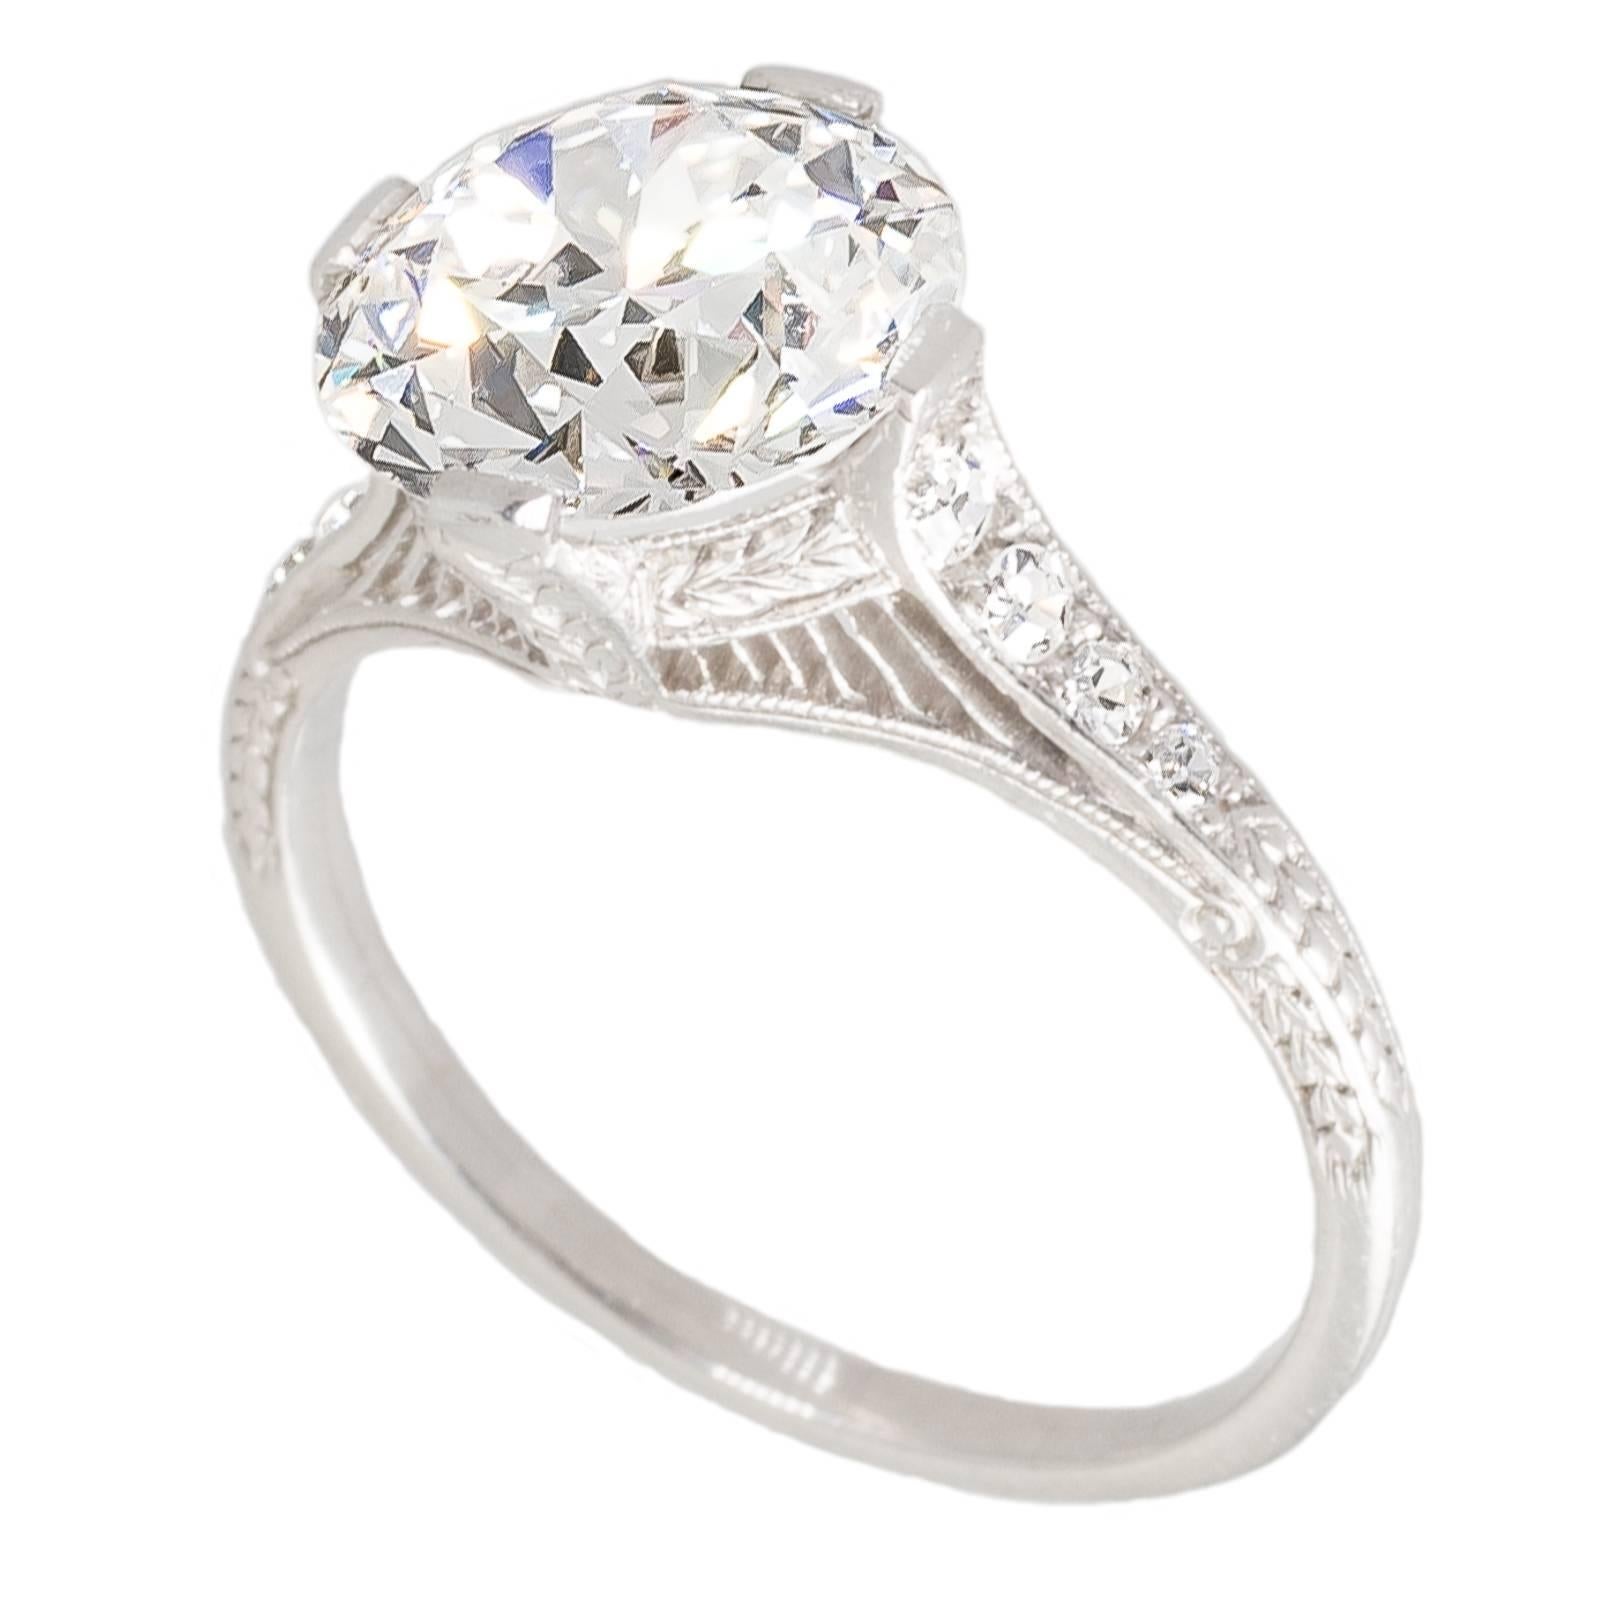 Antique 3.11 Carat GIA Certified Transition Cut Diamond and Platinum Ring For Sale